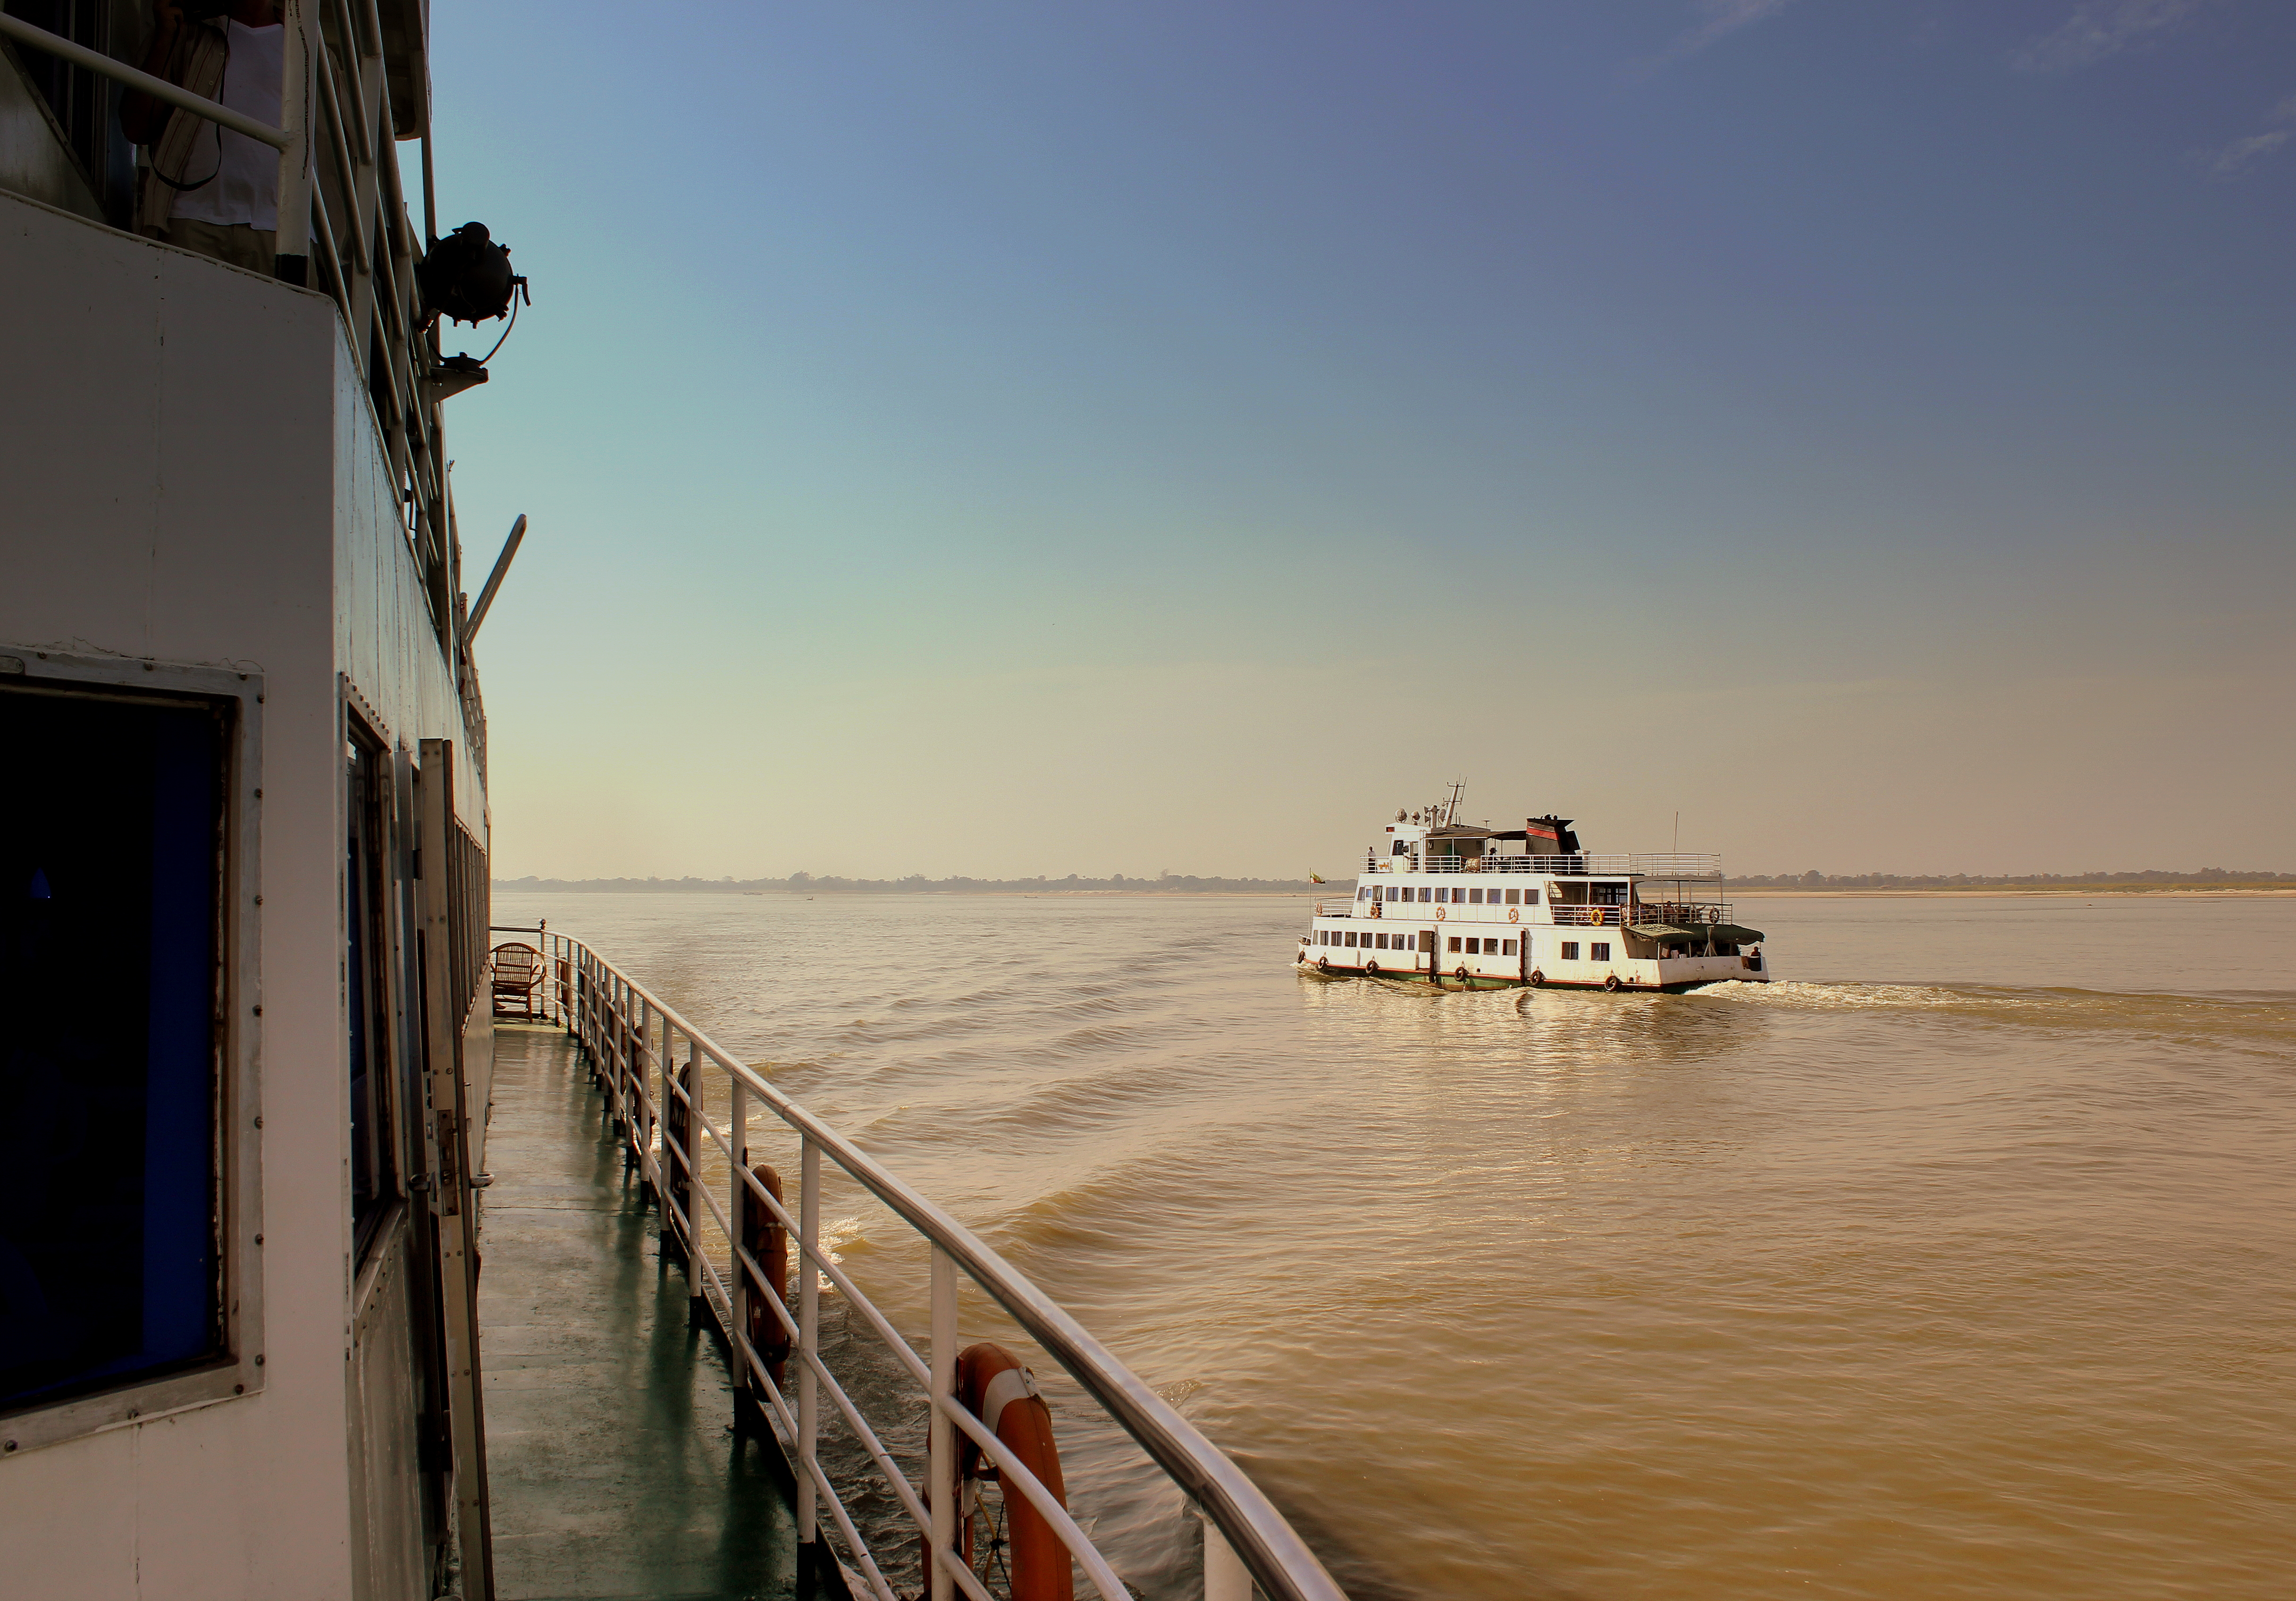 IRRAWADDY RIVER FERRY JOURNEY FROM BAGAN TO MANDALAY MYANMA FEB 2013 (8521142132)